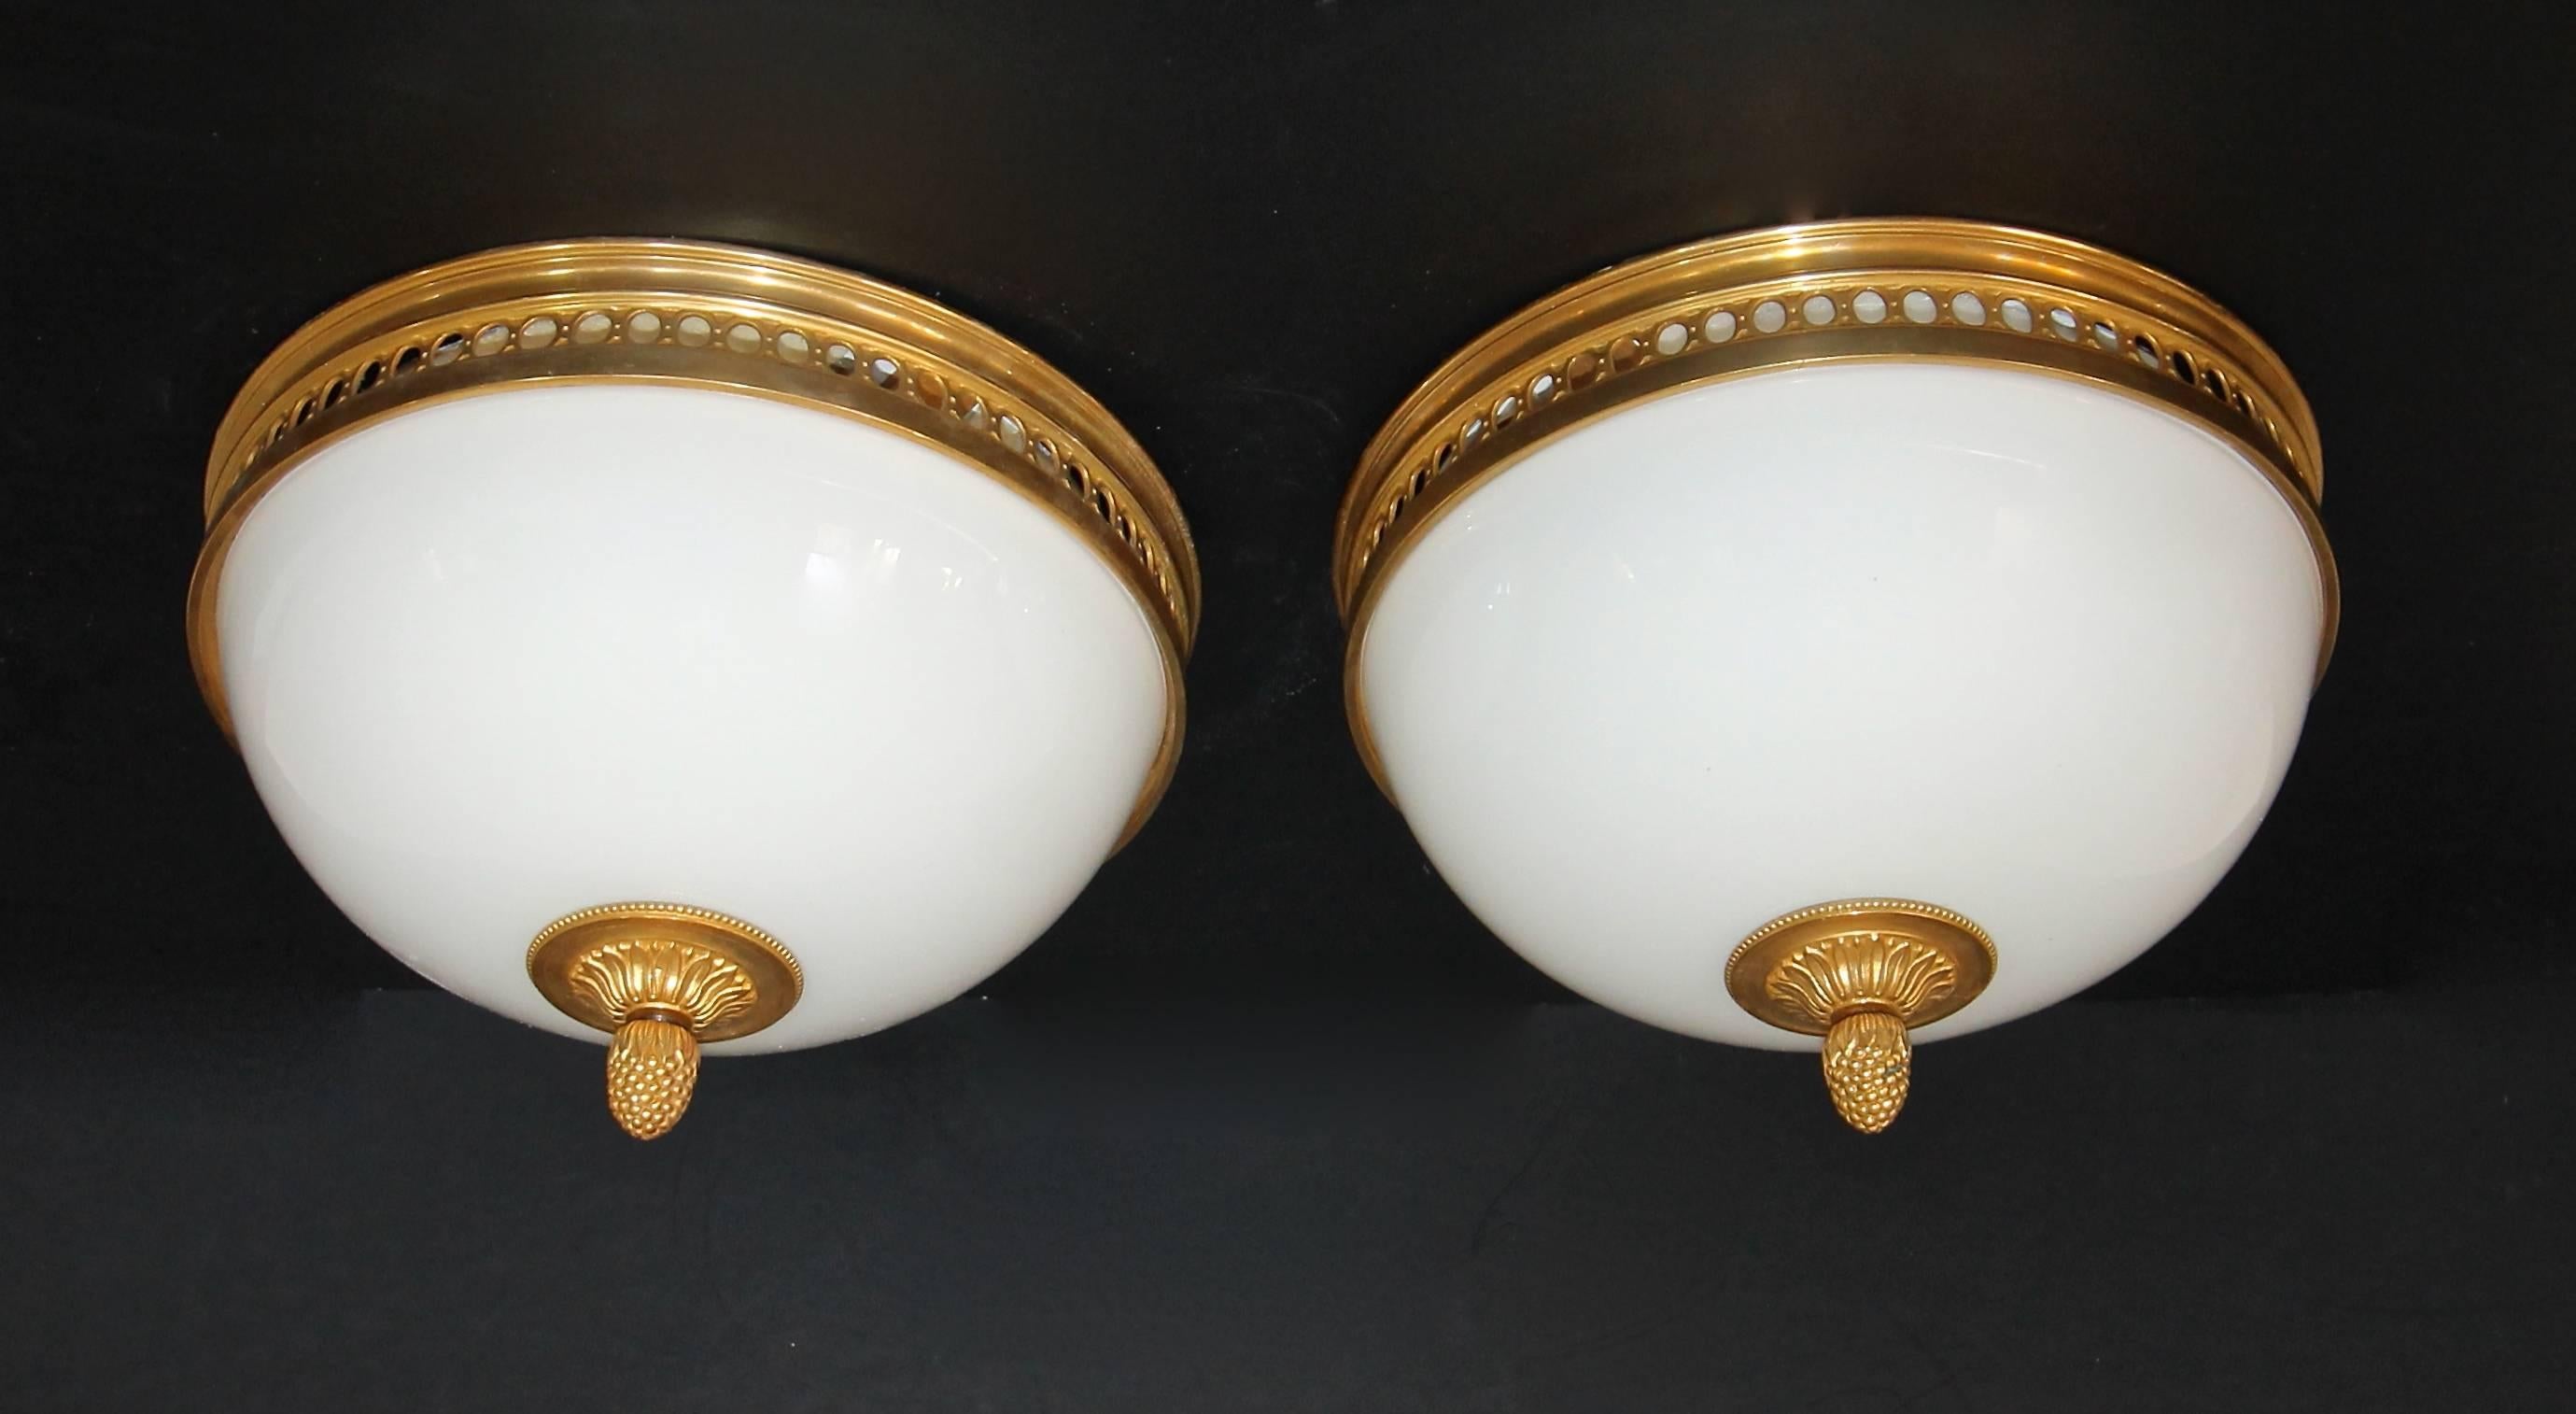 Pair of gorgeous French Louis XVI style flush mount ceiling lights with white opaline glass domes and with high quality finely detailed doré bronze ormolu mounts and acorn finials. Newly wired for US, each fixture uses two - candelabra 